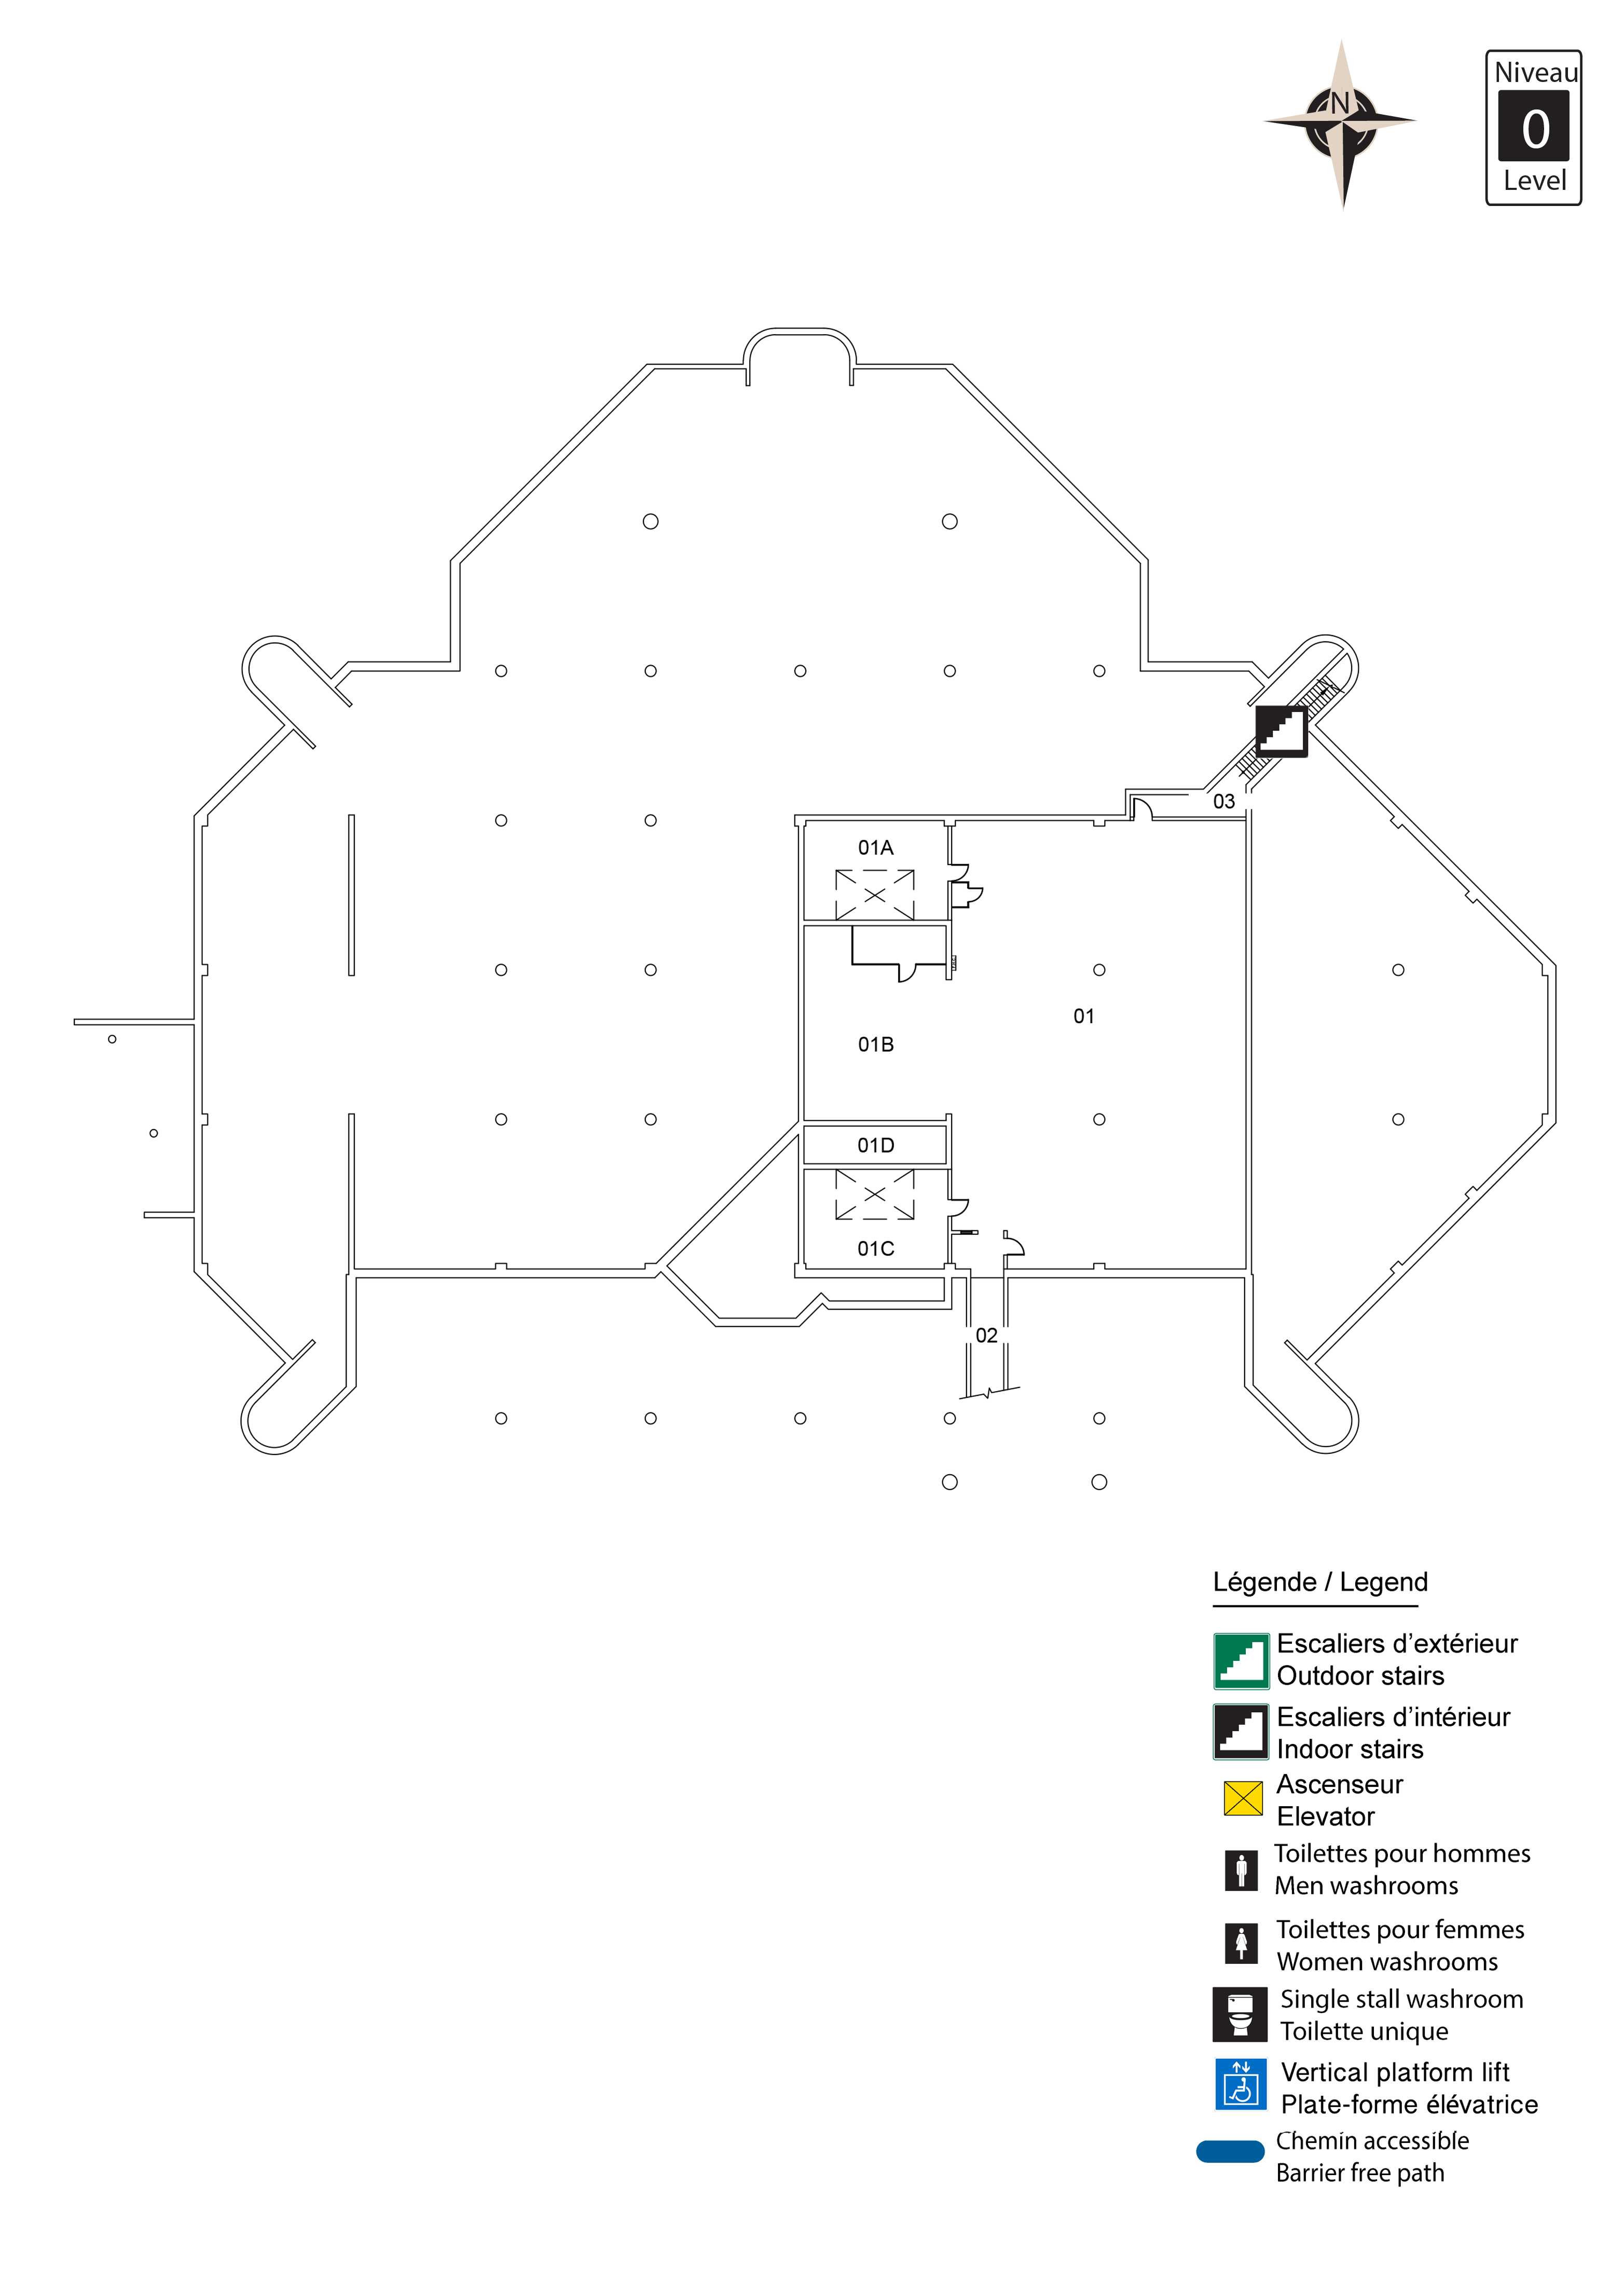 Accessible map of LMX level 0